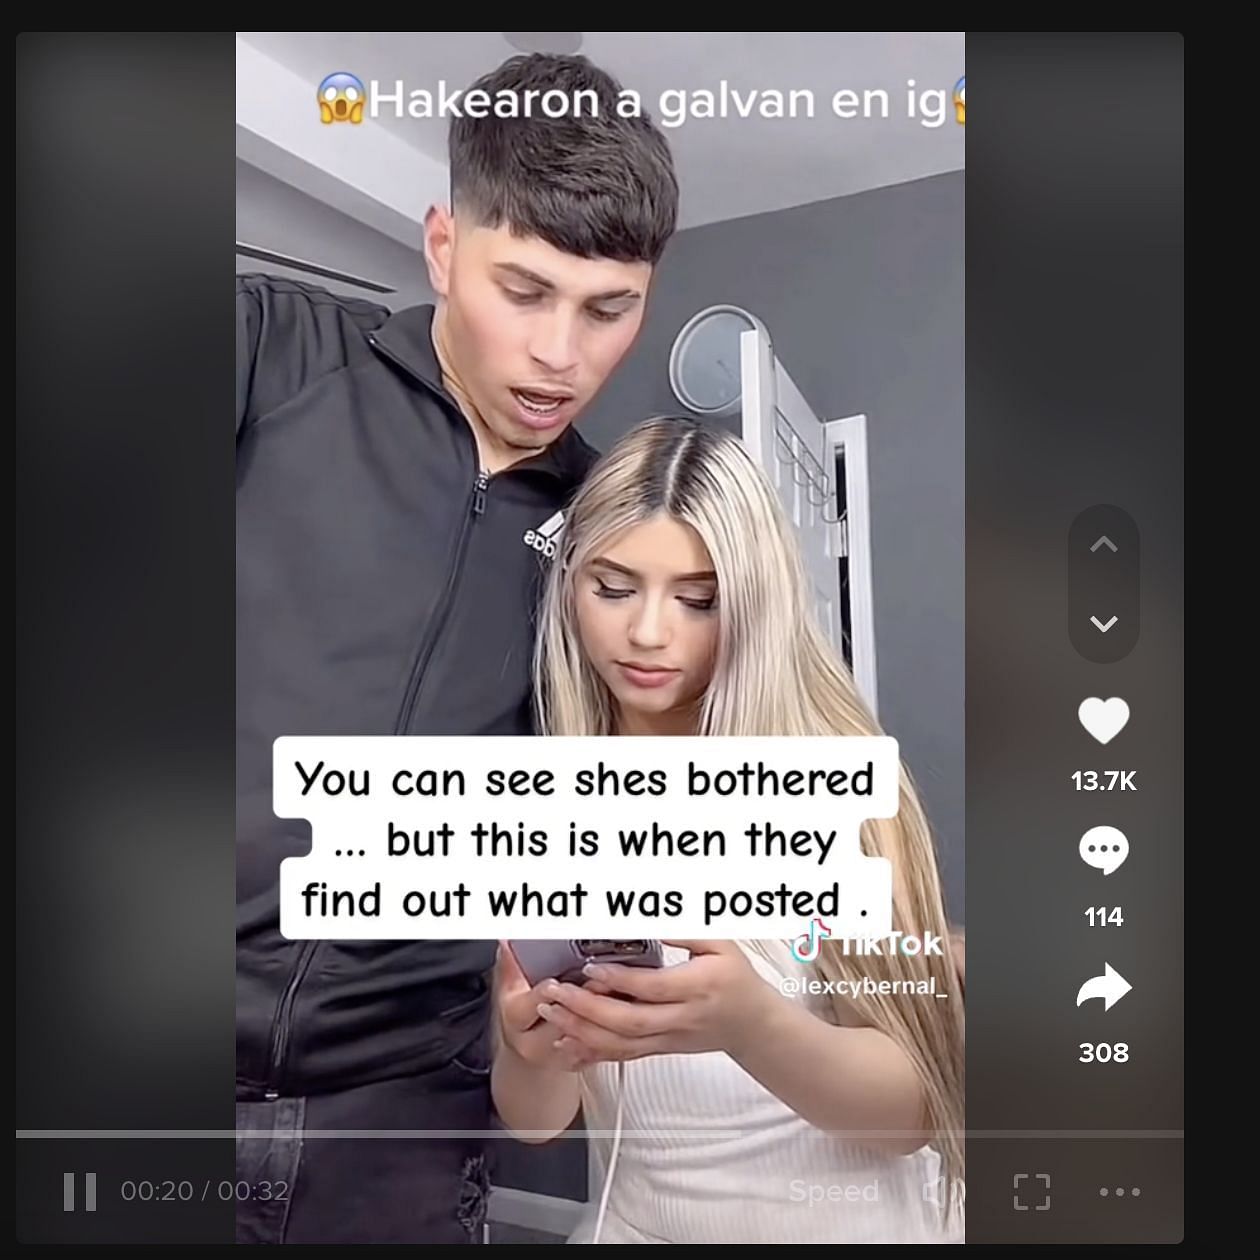 Fans informed El Galvancillo about his Instagram account being hacked, which shocked the influencer and his girlfriend. (Image via TikTok)